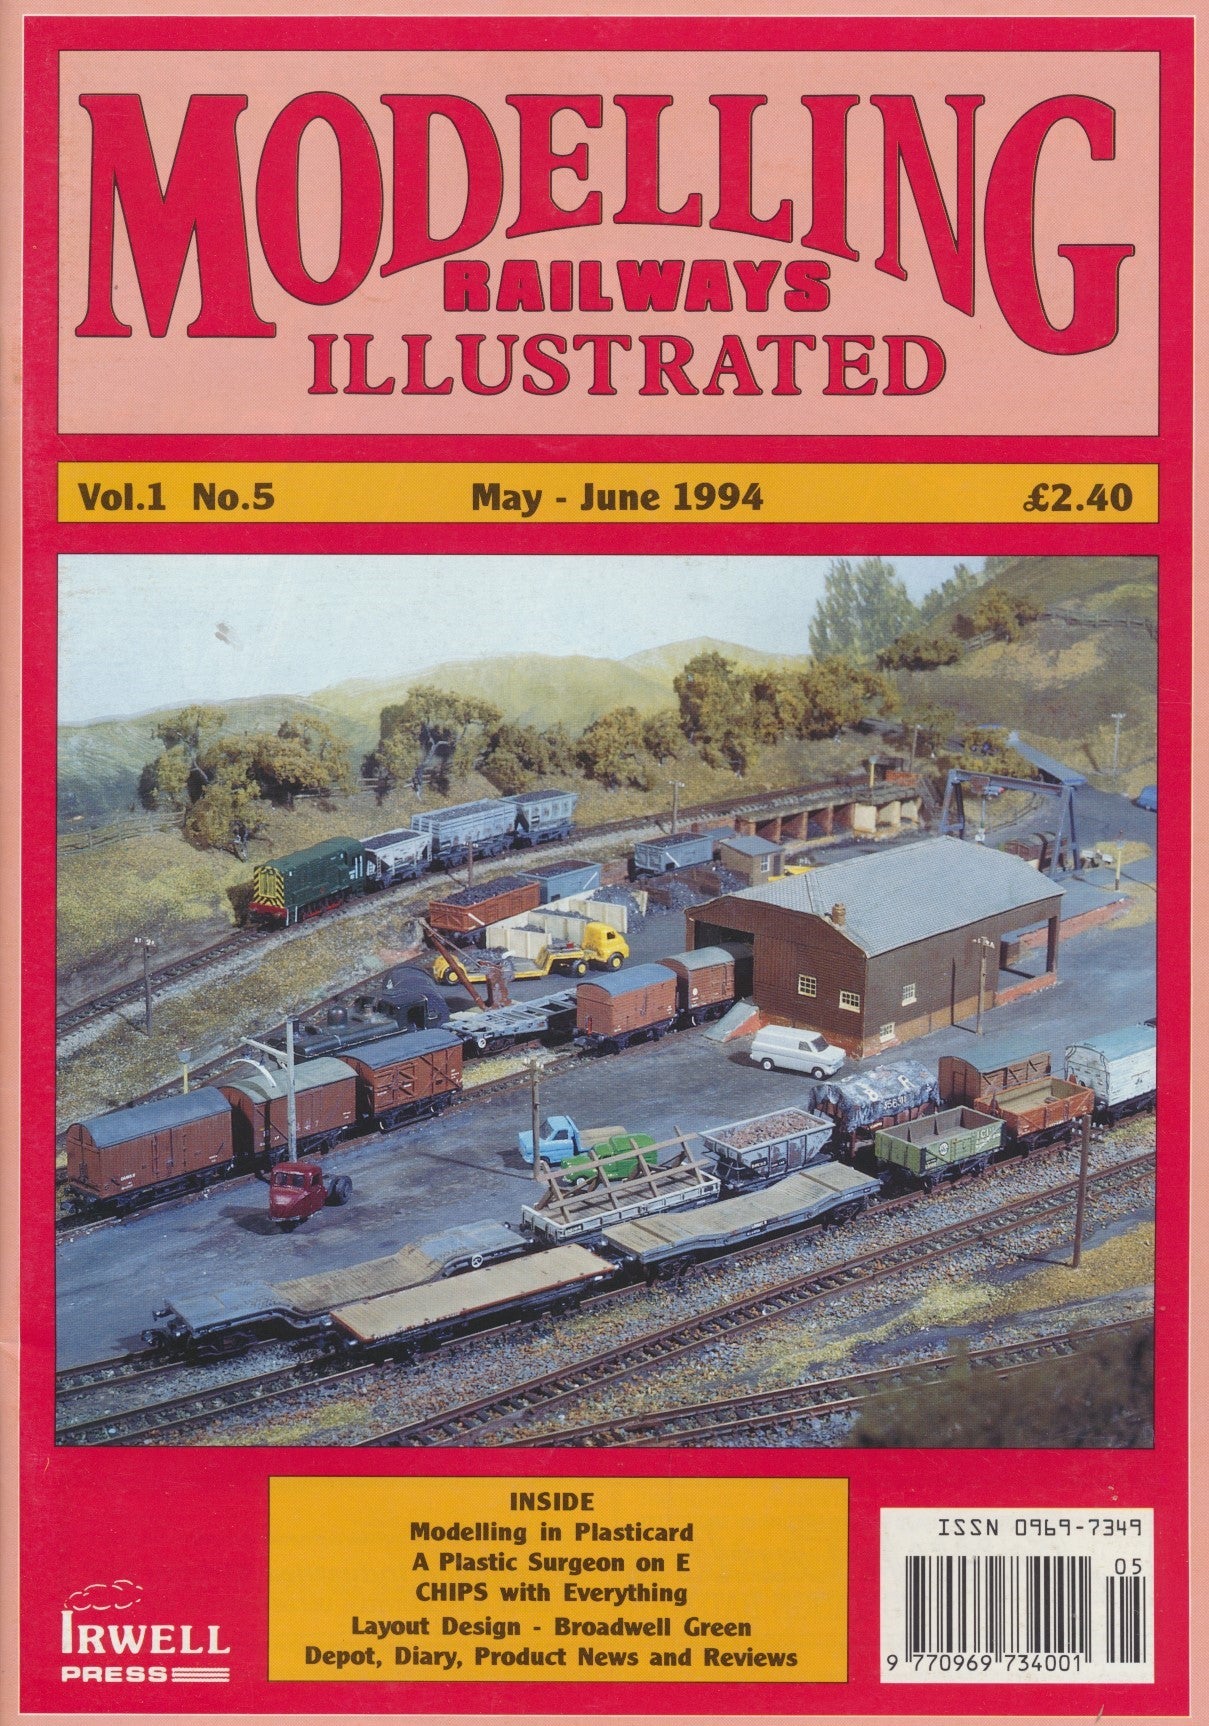 Modelling Railways Illustrated: Vol. 1 No. 5 - May-June 1994